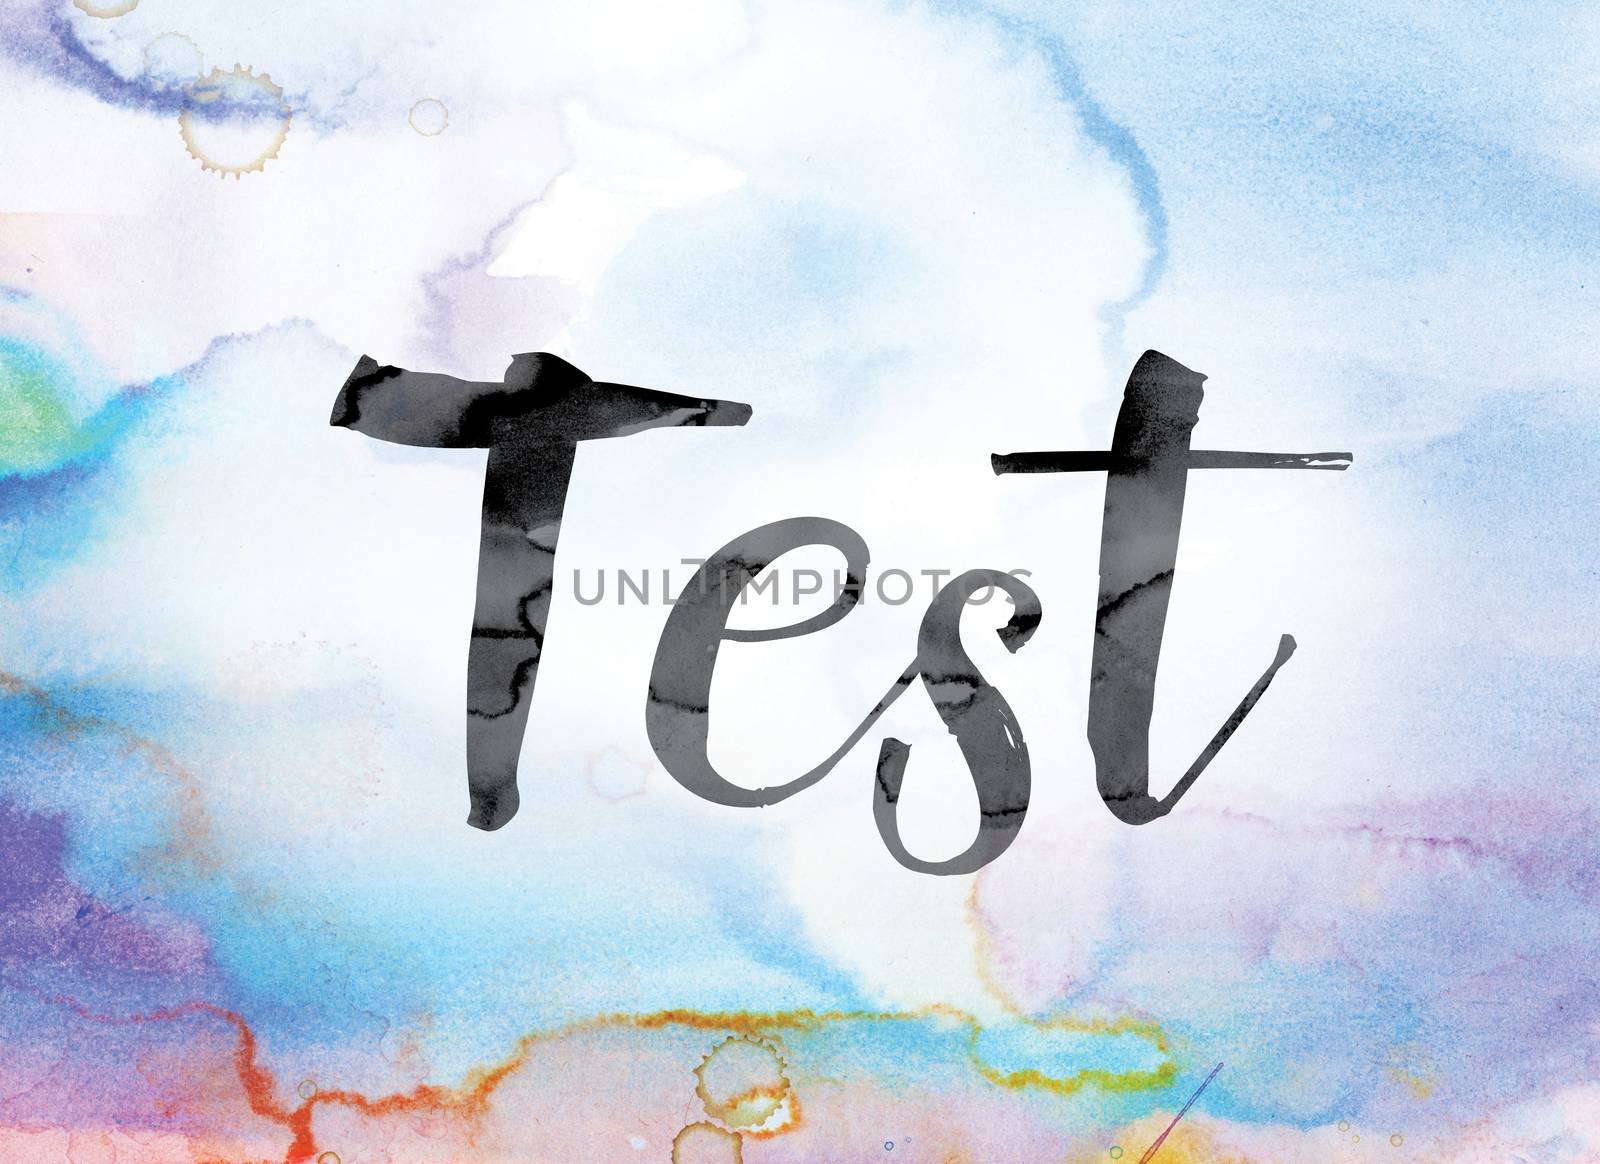 The word "Test" painted in black ink over a colorful watercolor washed background concept and theme.